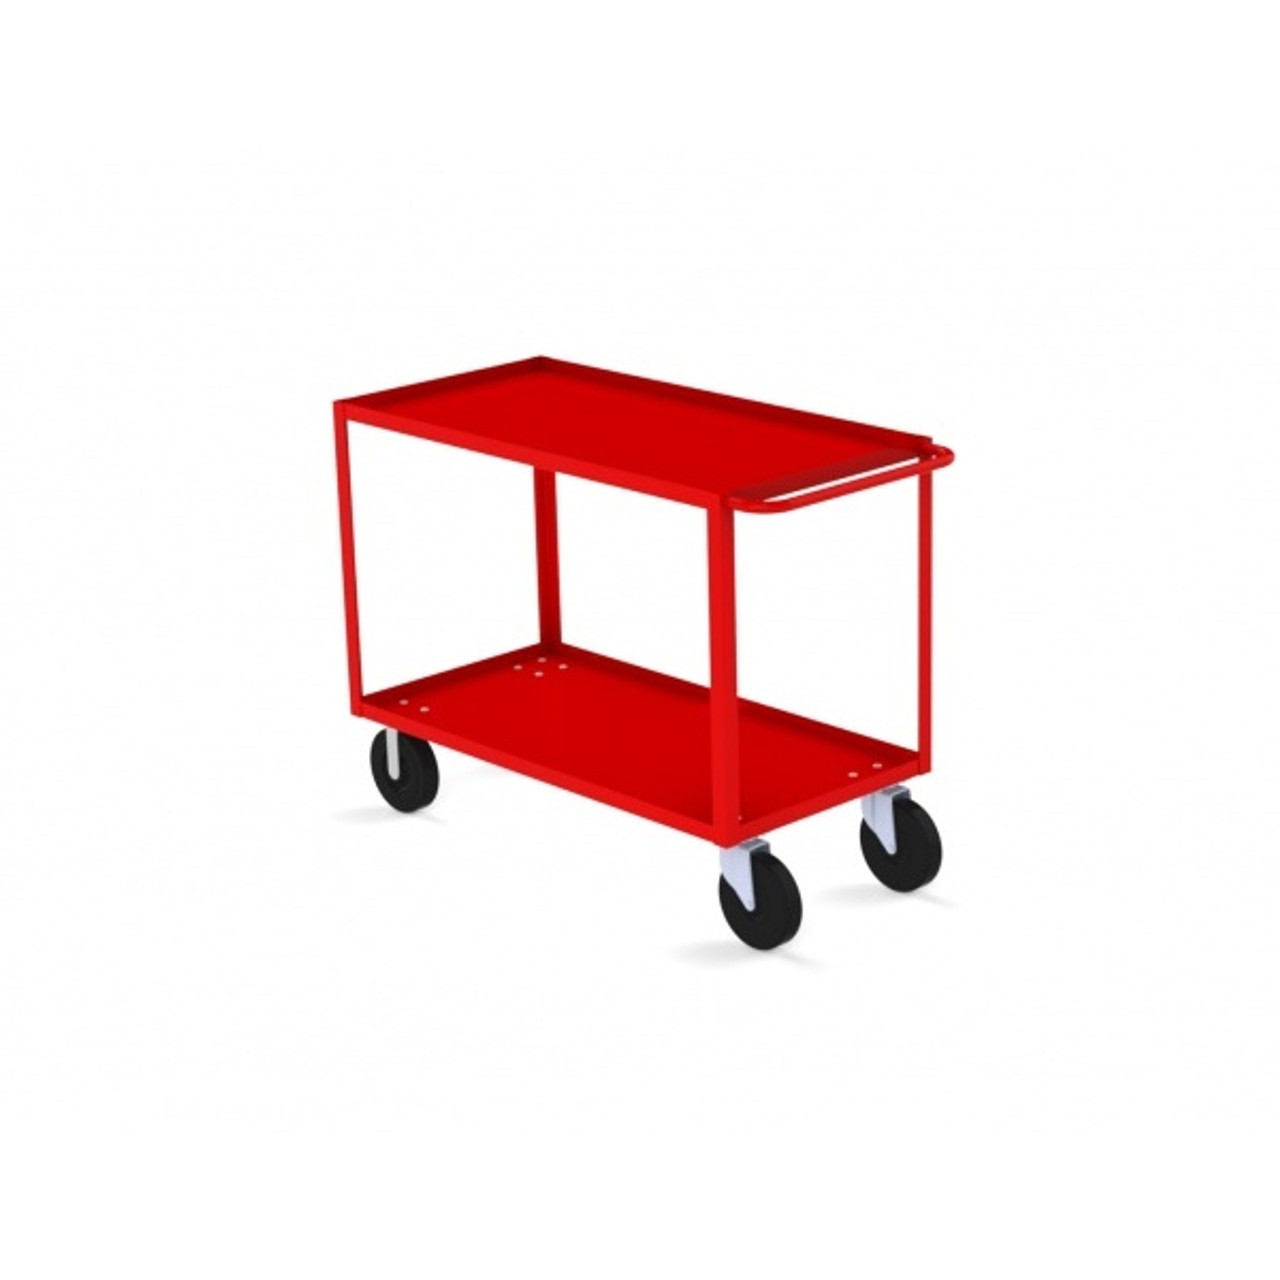 Valley Craft Two Shelf 30 x 48" Utility Cart, Red with Mold On Casters (CALL FOR BEST PRICING)